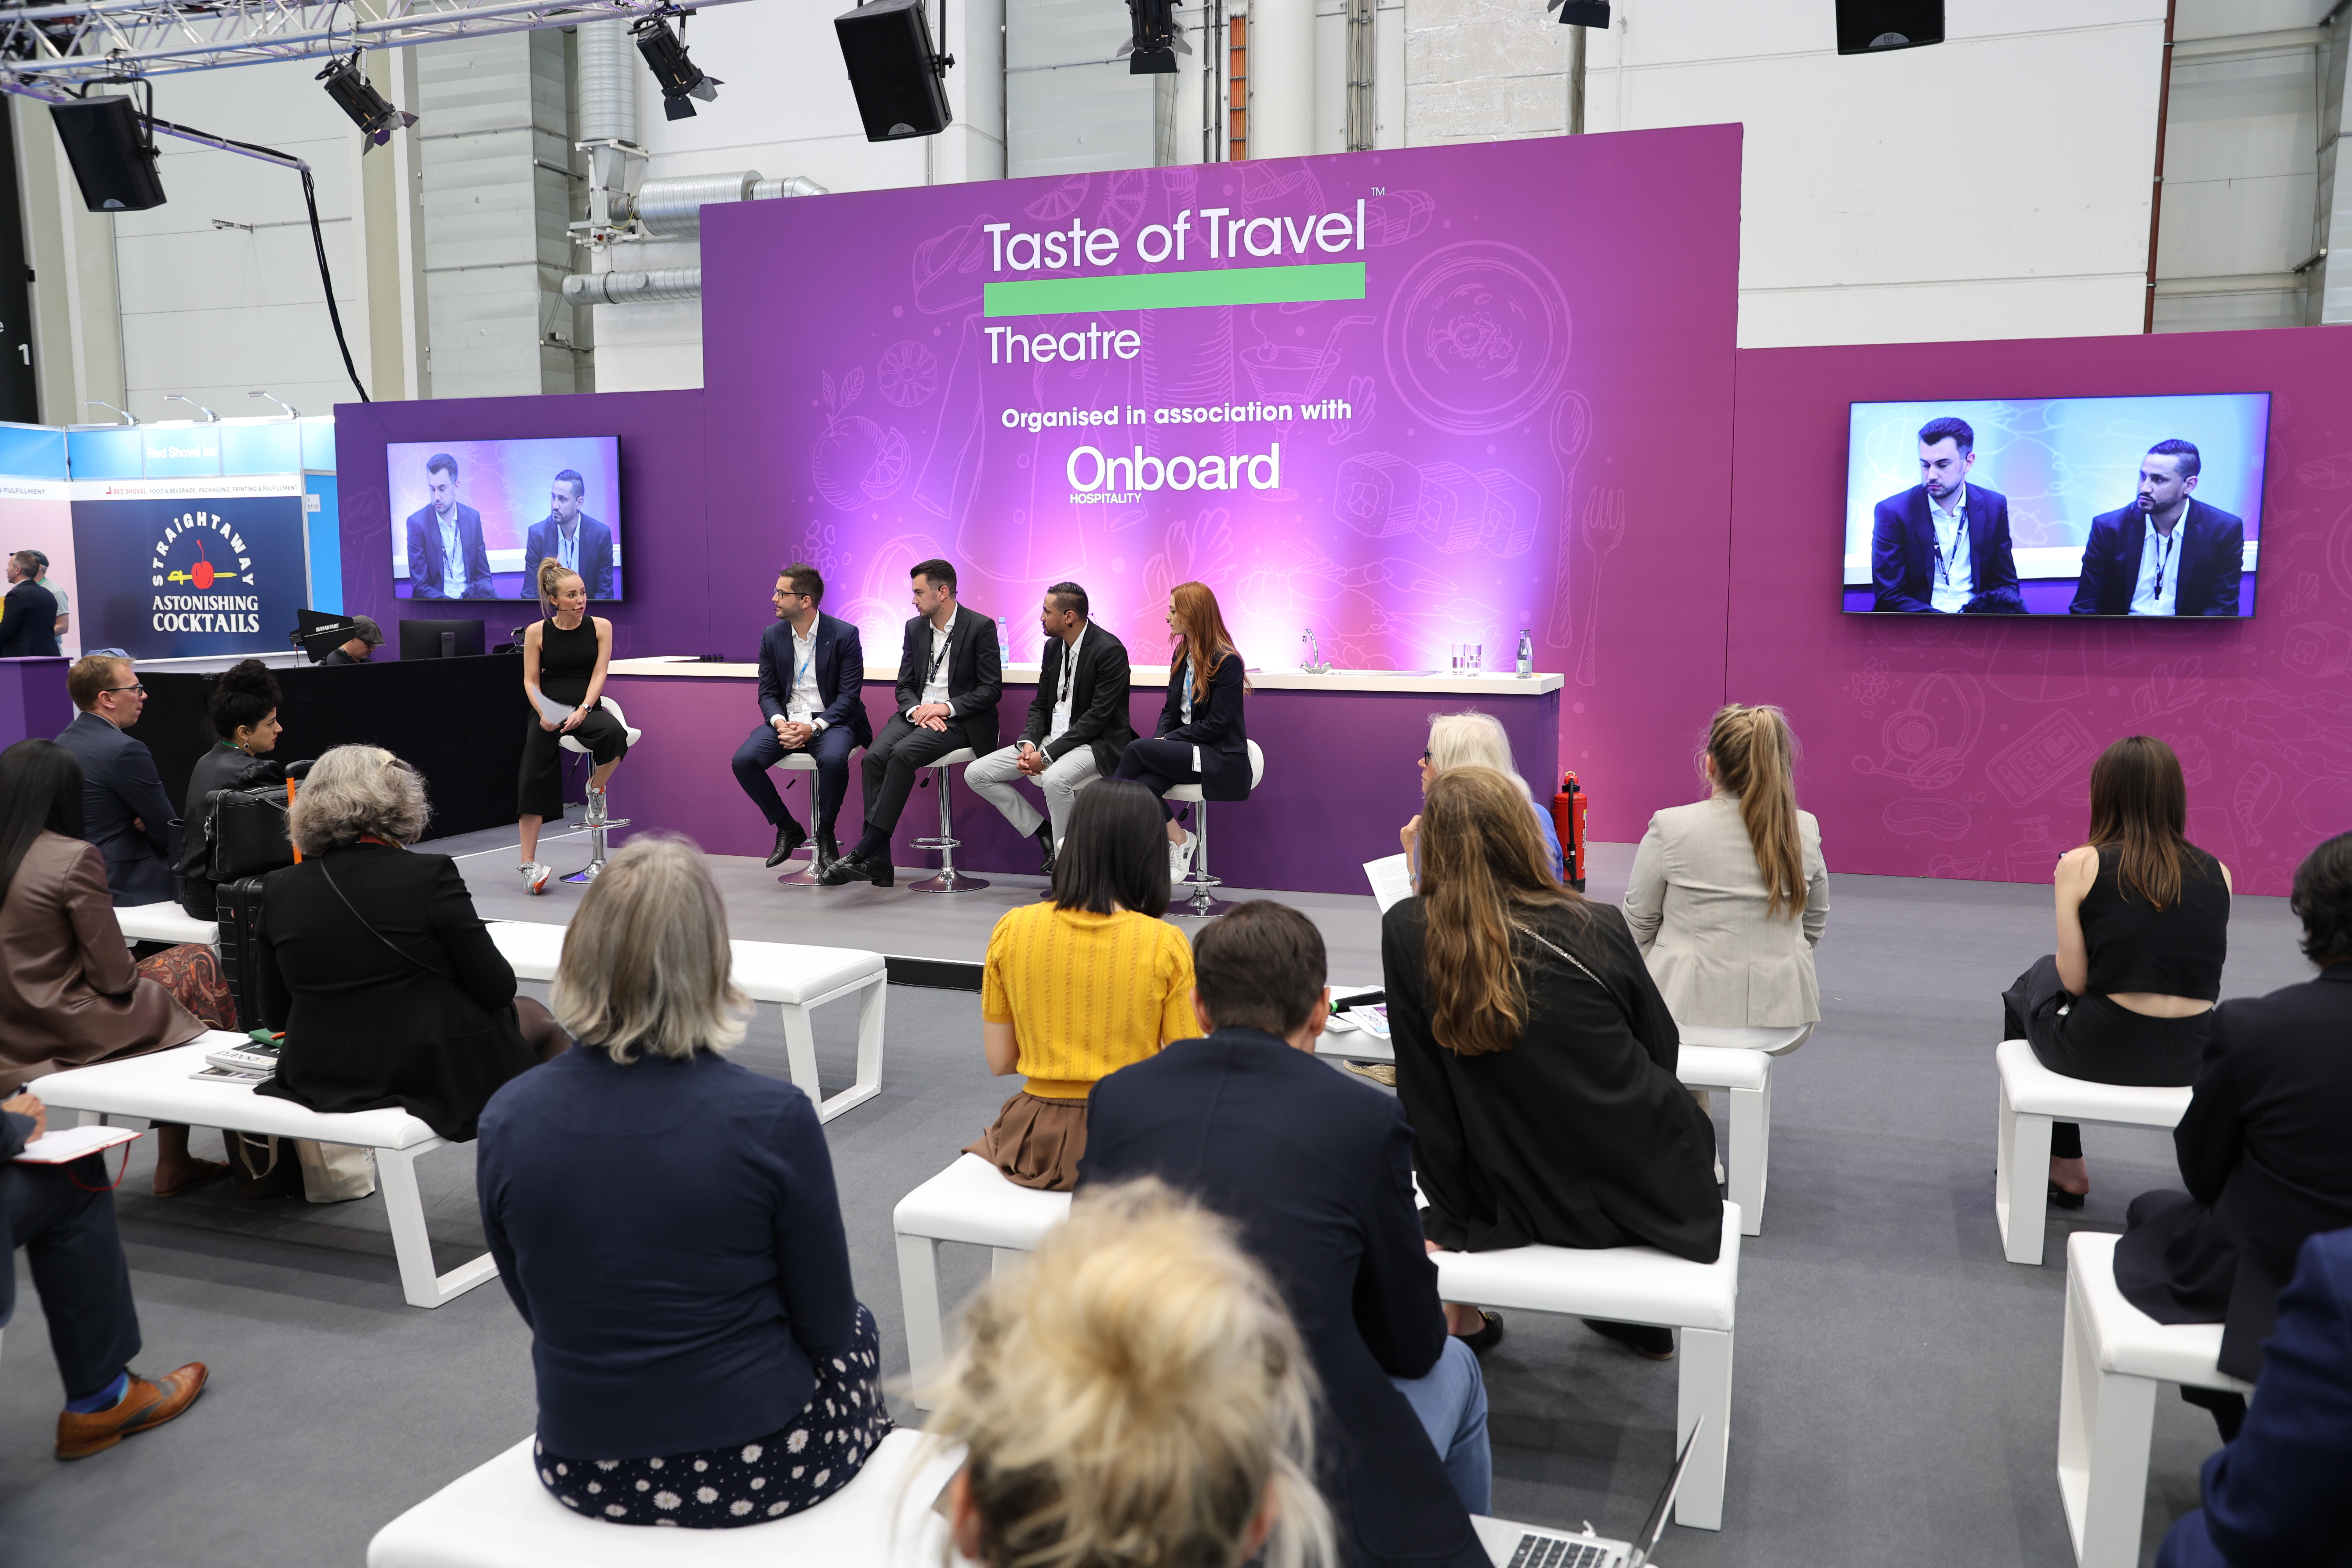 seated taste of travel theatre audience at wtce